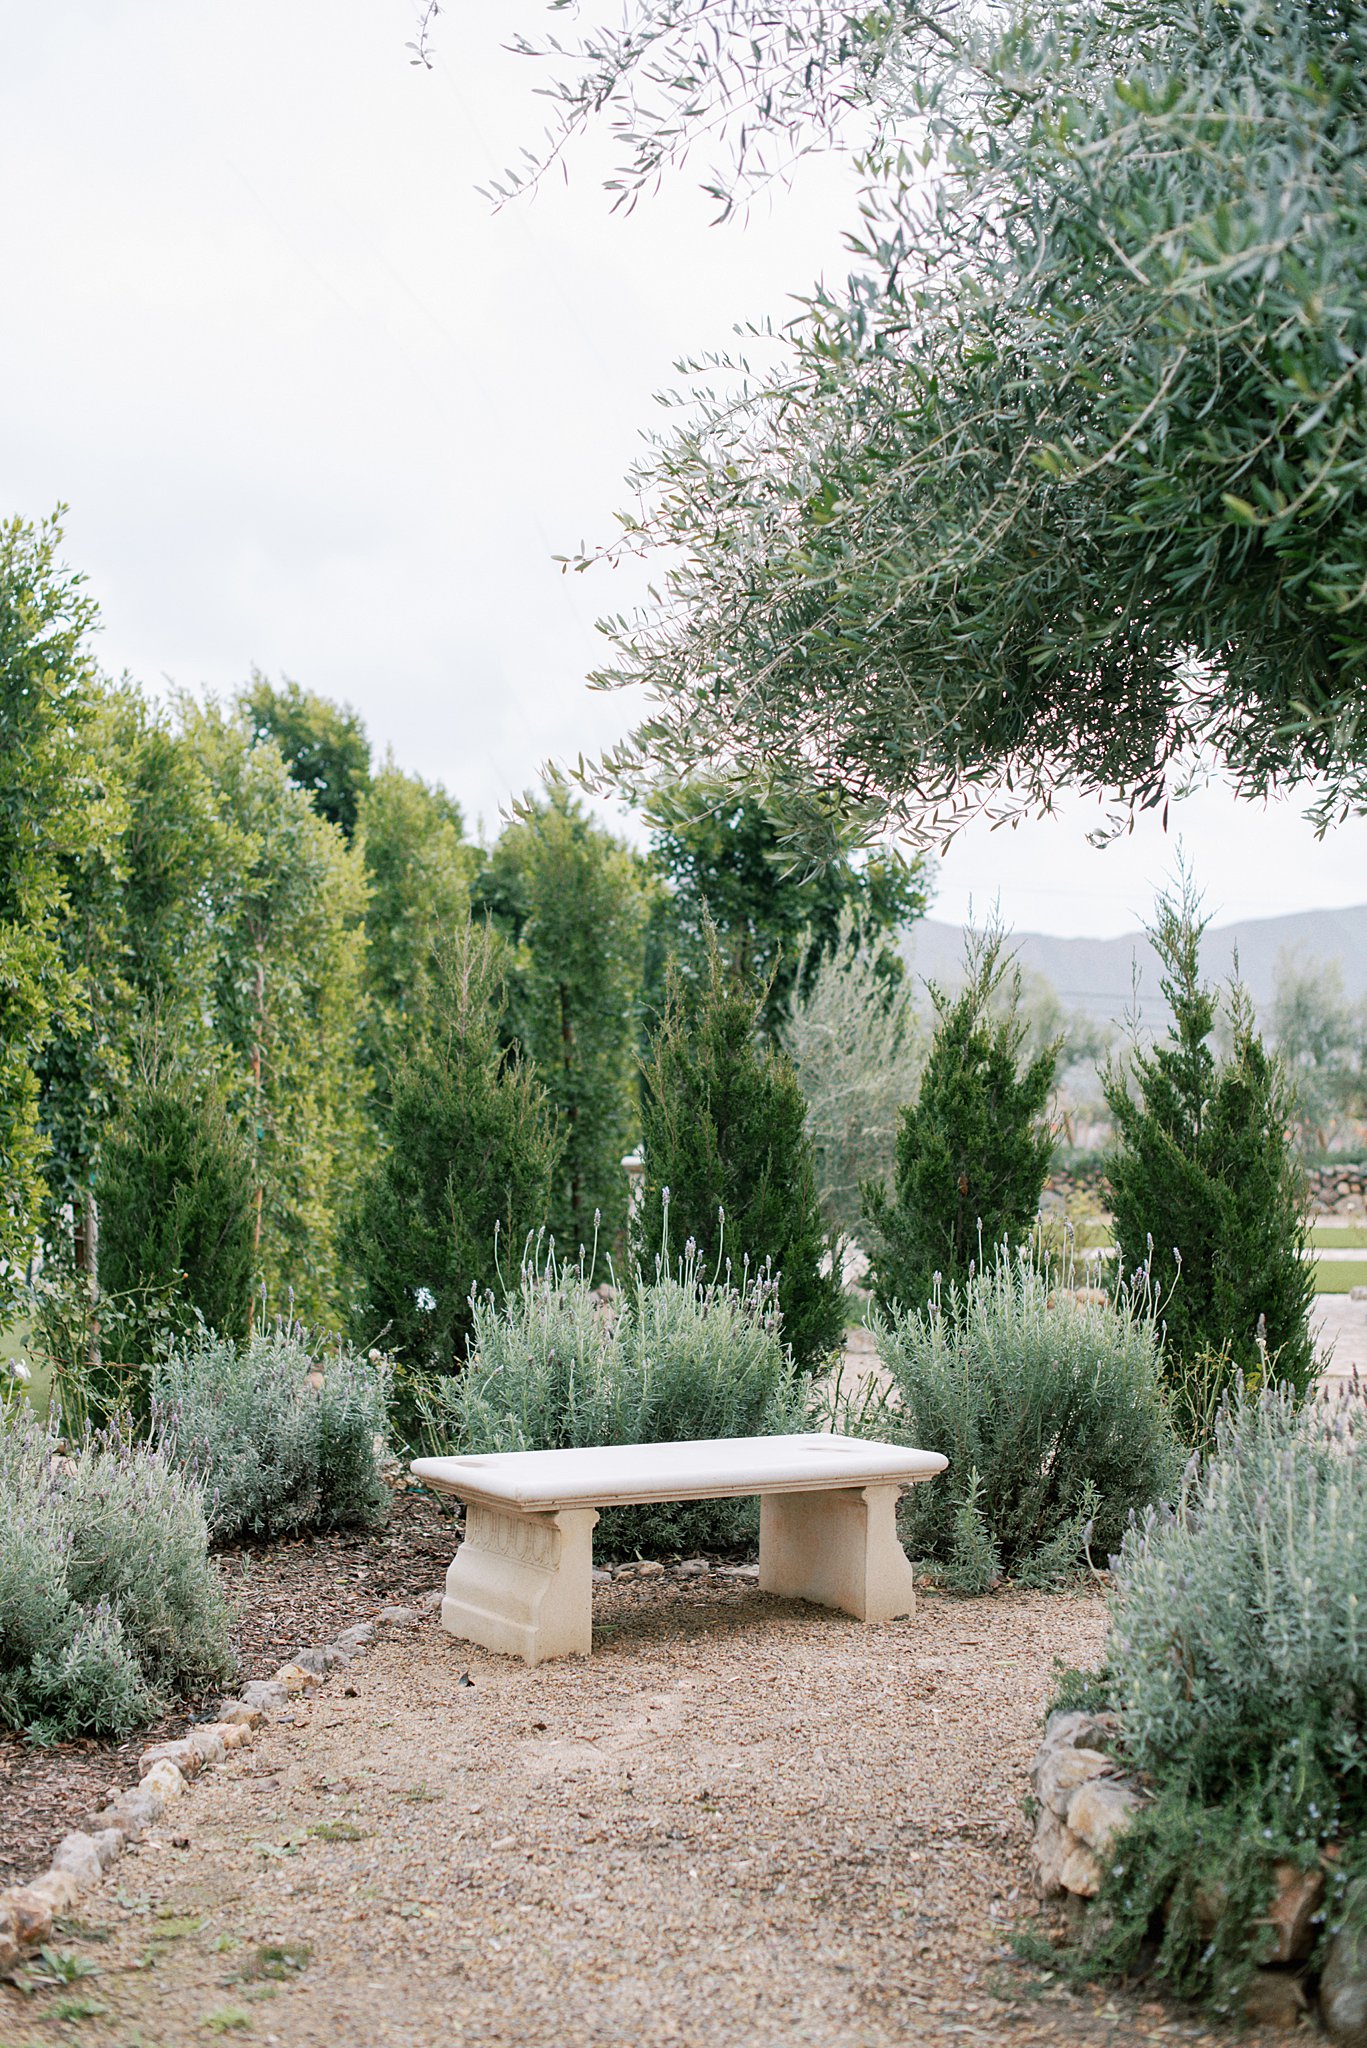 A stone bench surrounded by lavender and greenery is one of many idyllic photo locations across the venue at Tuscan Rose Ranch